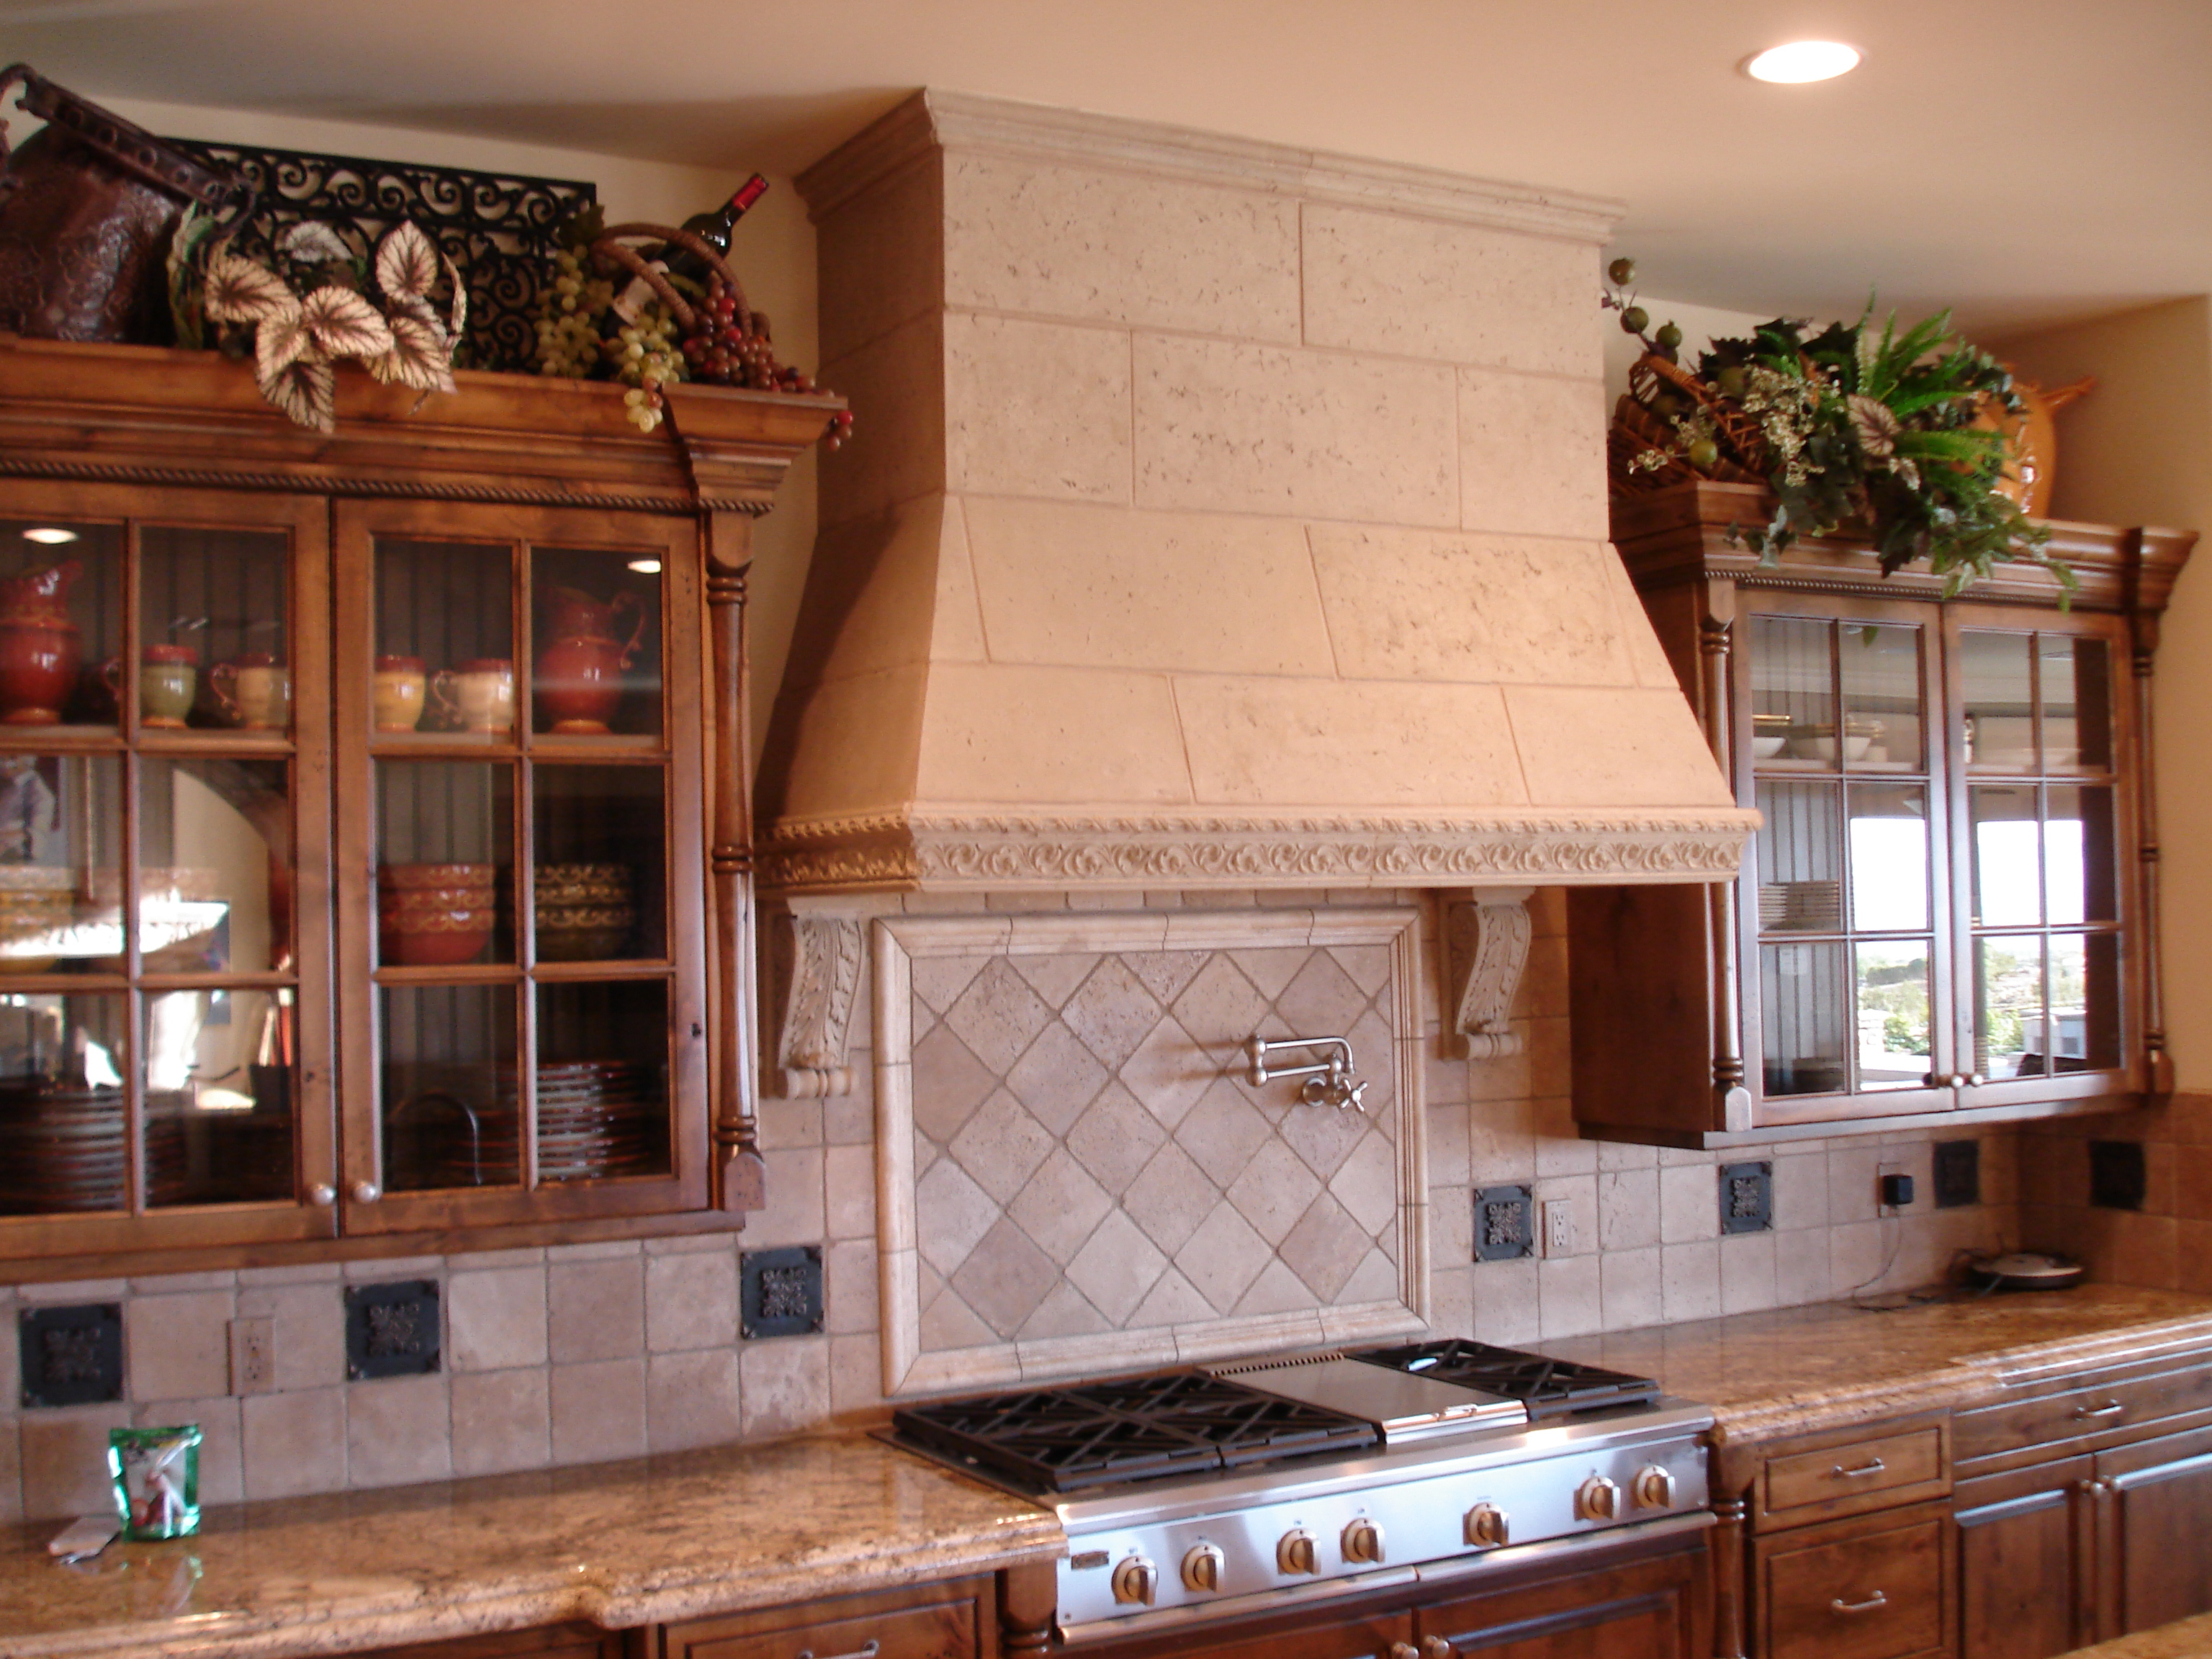 DRESS UP YOUR KITCHEN WITH A DECORATIVE RANGE HOOD